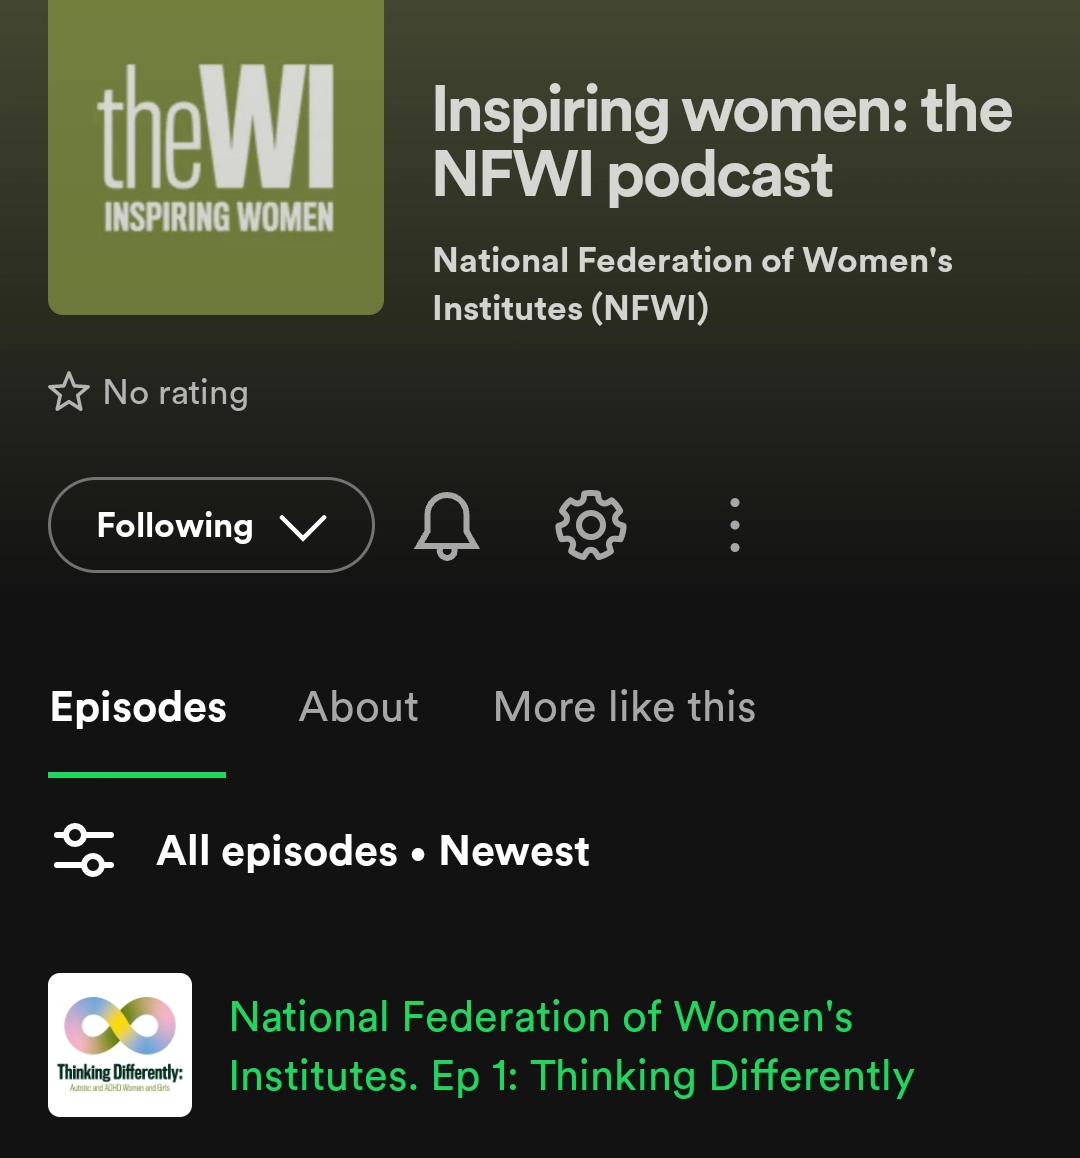 NFWI stepping into the ever increasingly popular world of podcasts. We are trying something new and a great way to communicate to members and WI friends on the more in depth topics. It gives the opportunity to hear from members lived experiences . Definitely worth a listen.